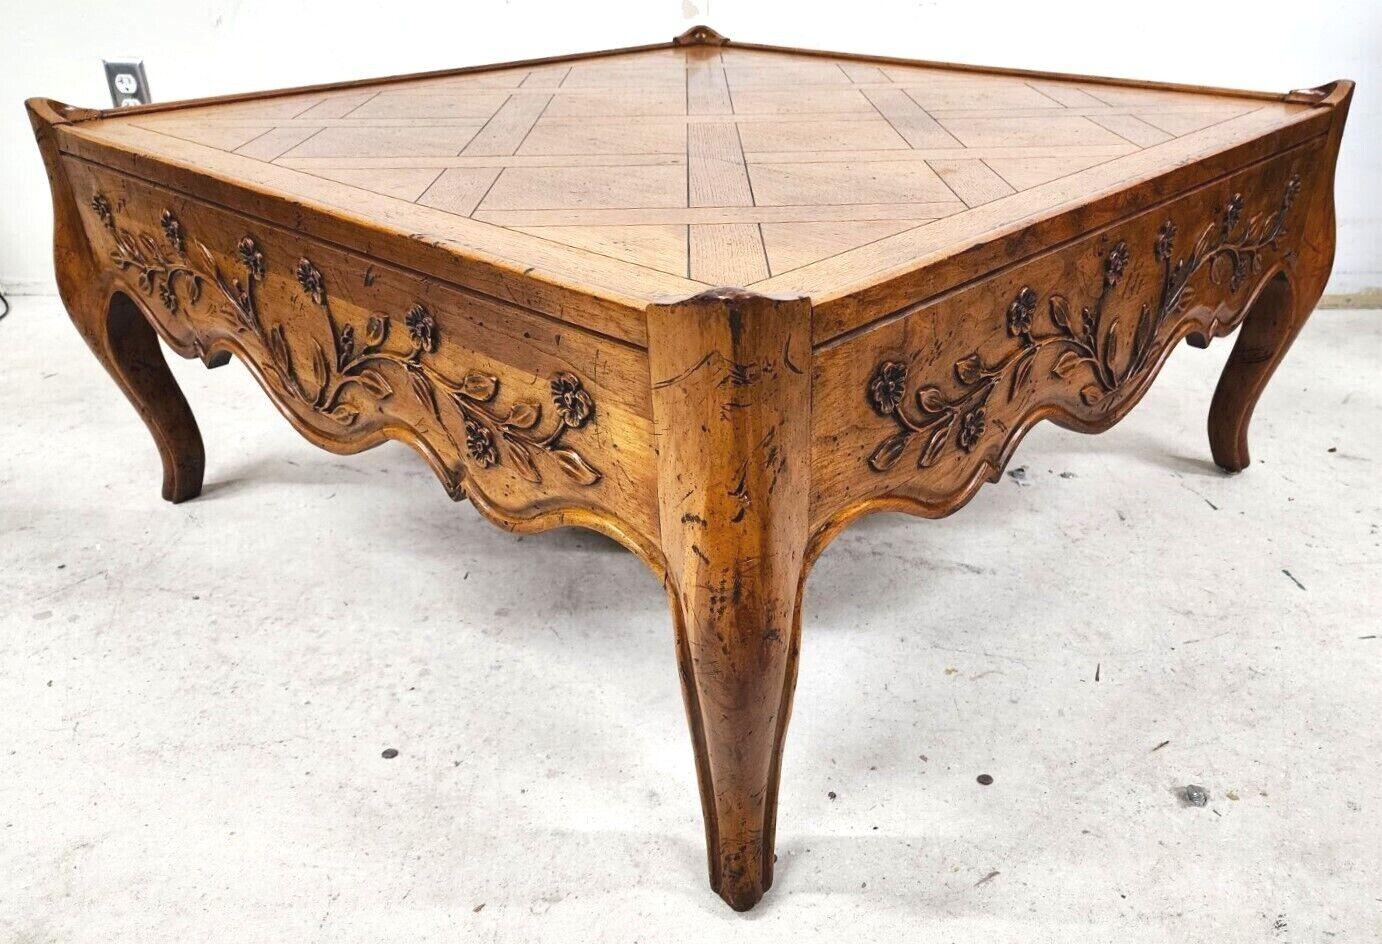 Offering one of our recent Palm Beach estate fine furniture acquisitions of a
vintage country French parquet top solid wood coffee table.

We have many other similar tables listed. To see them, scroll down and click on VIEW ALL FROM SELLER, where